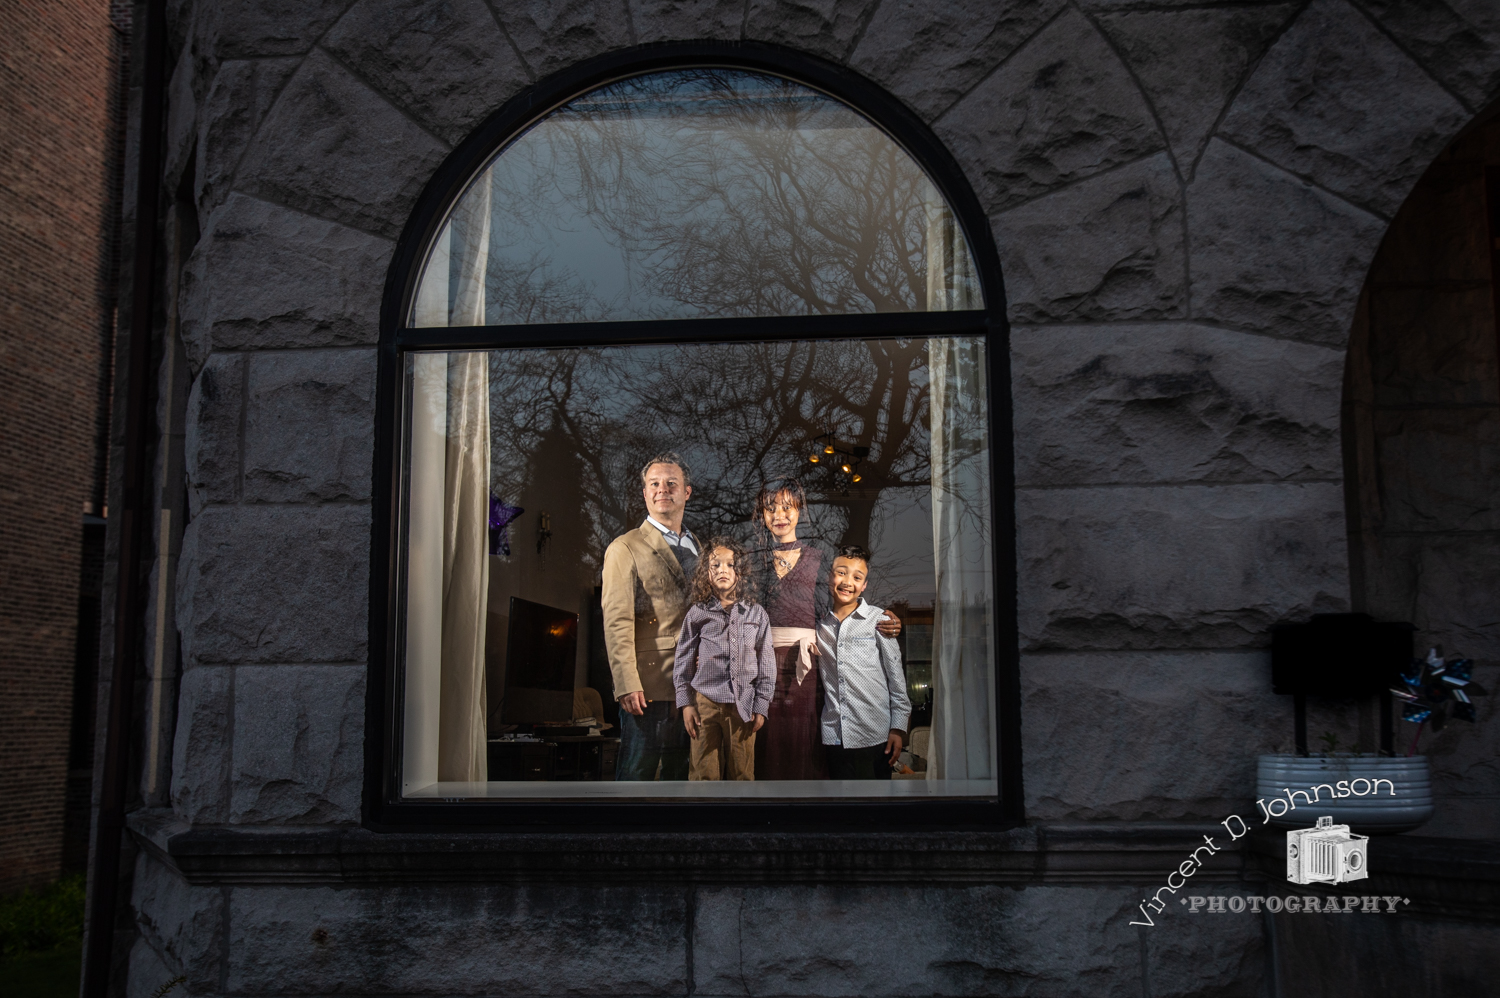 My family and I at our front bay window. This was originally done to document our own situation, but it became the spark for this series of images.